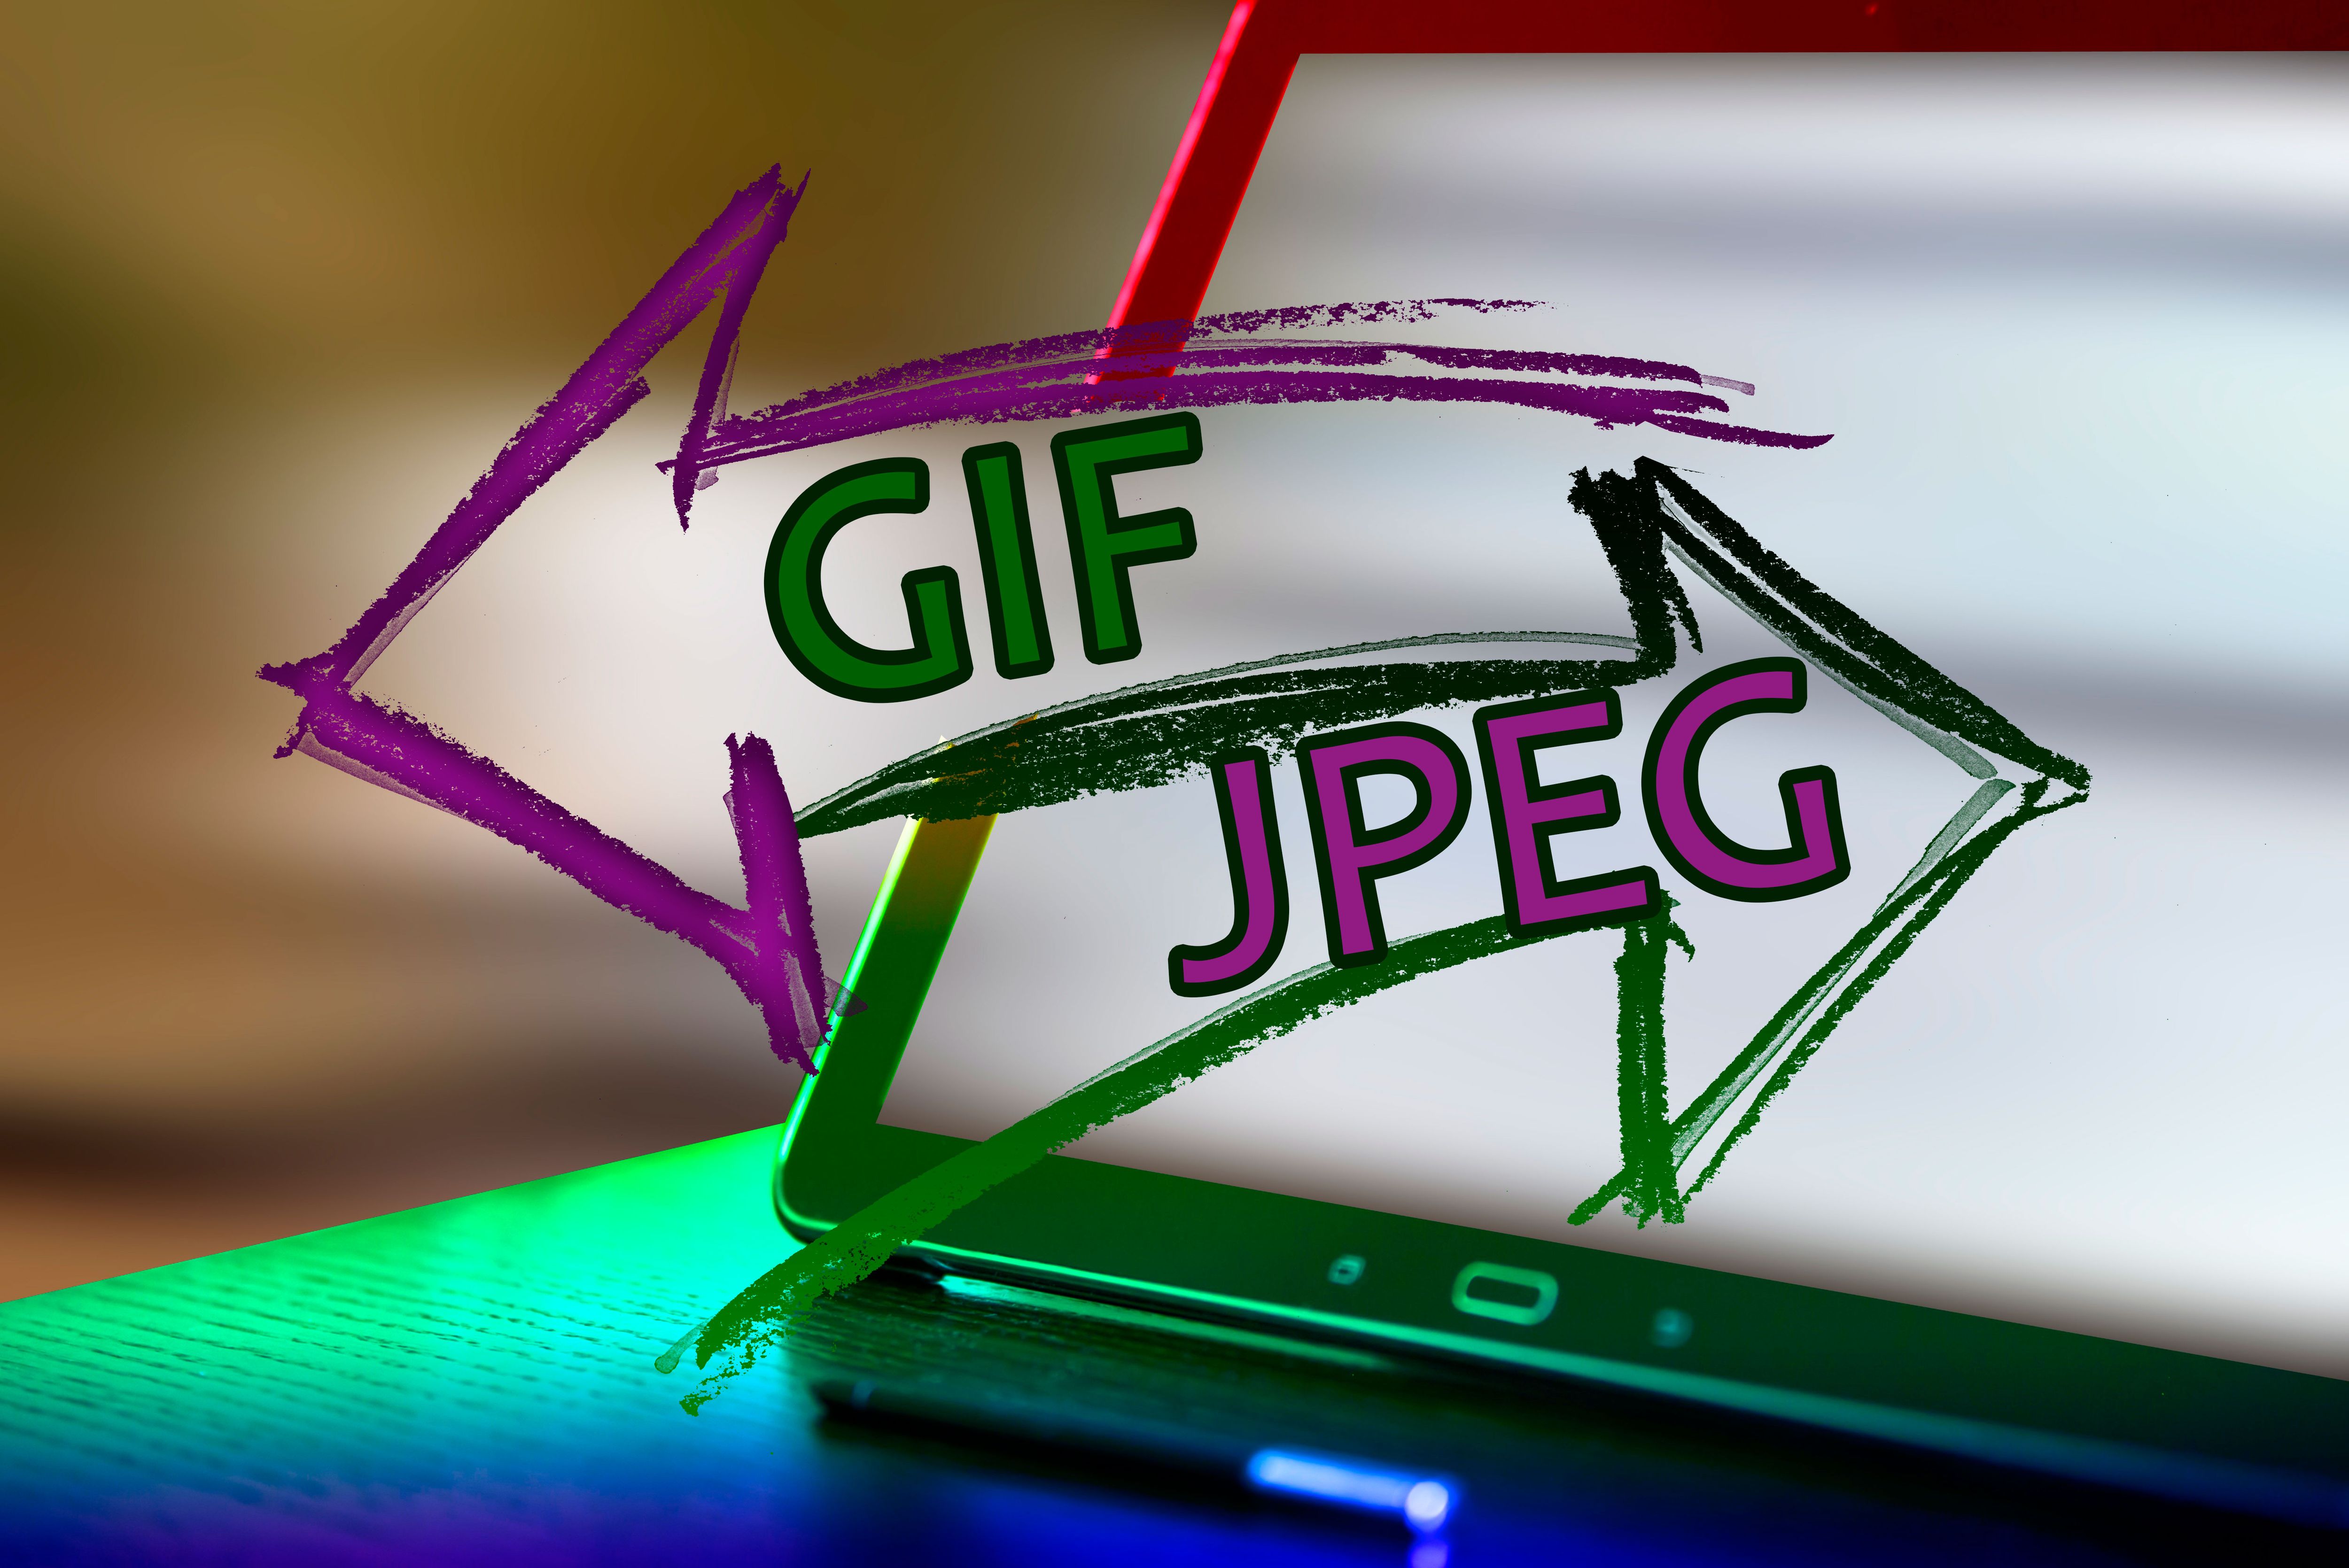 The Best Way to Convert JPG to GIF..